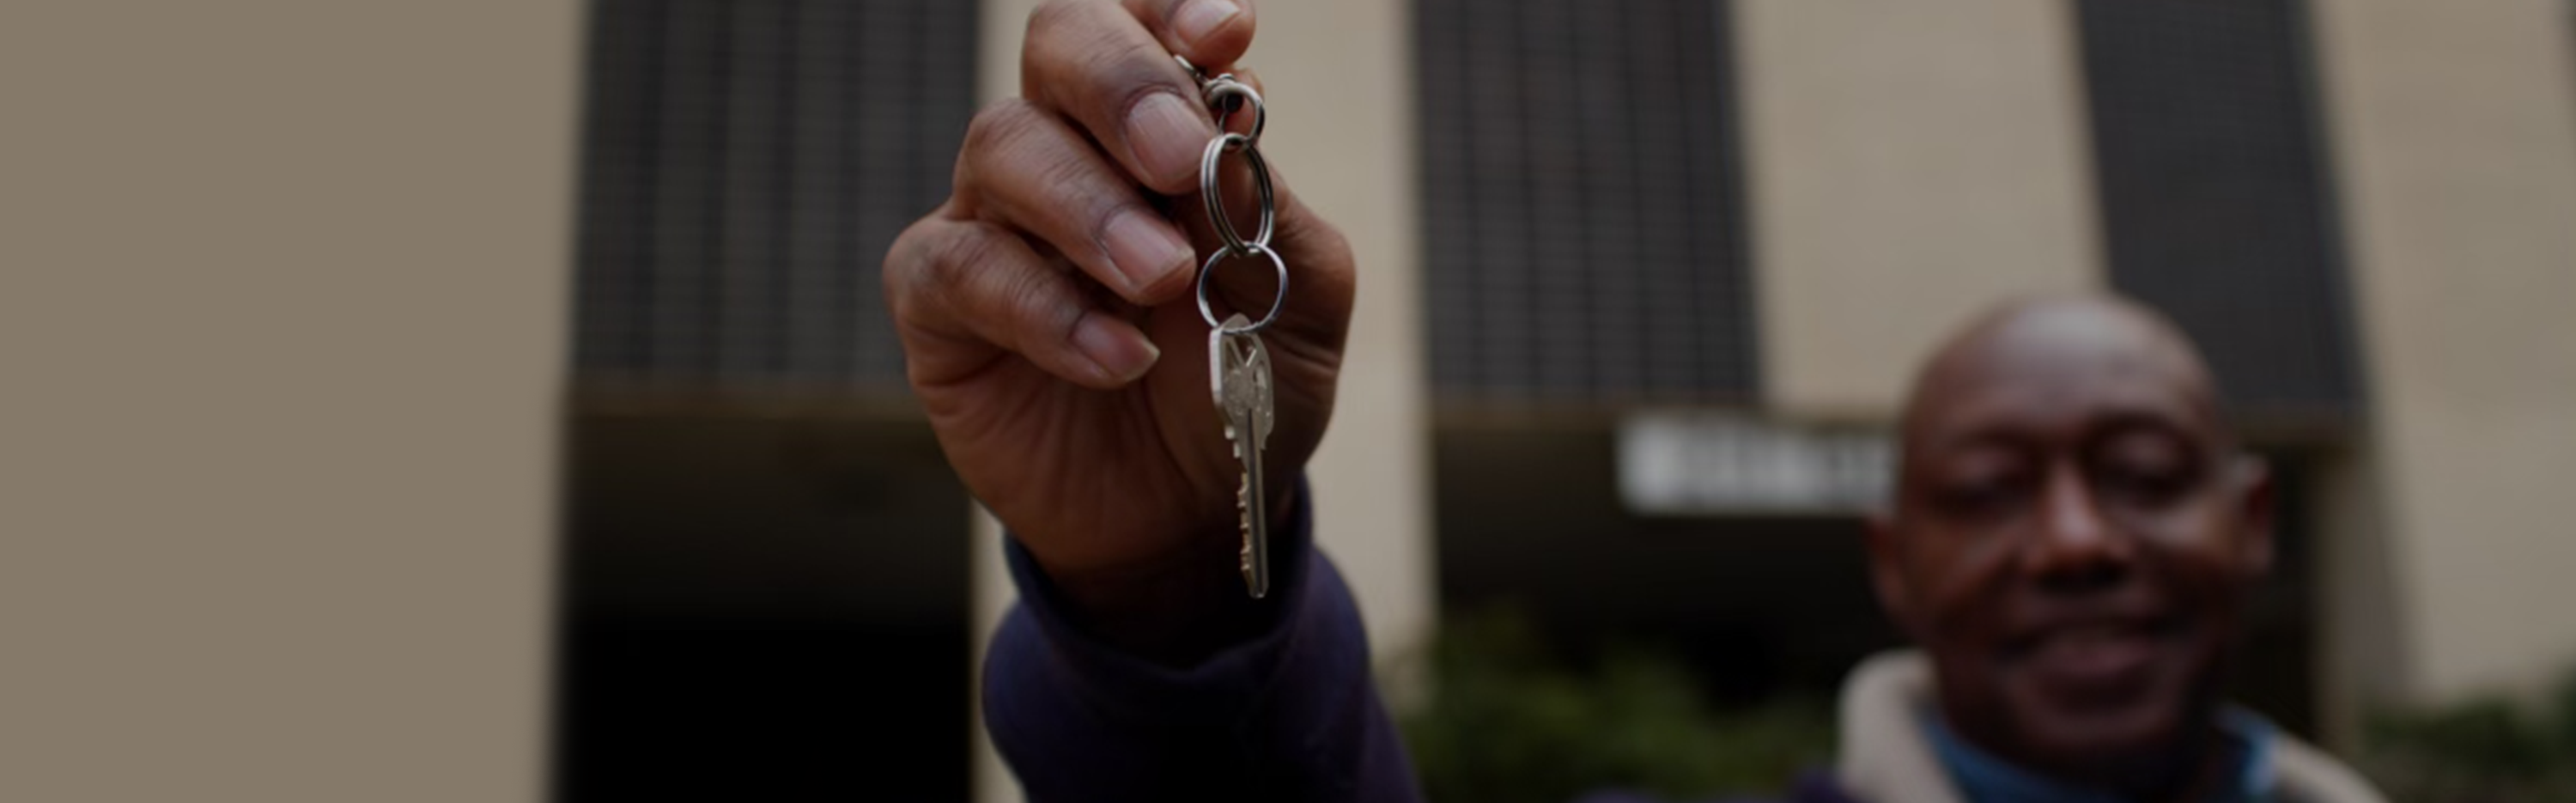 Man standing in front of building while holding keys